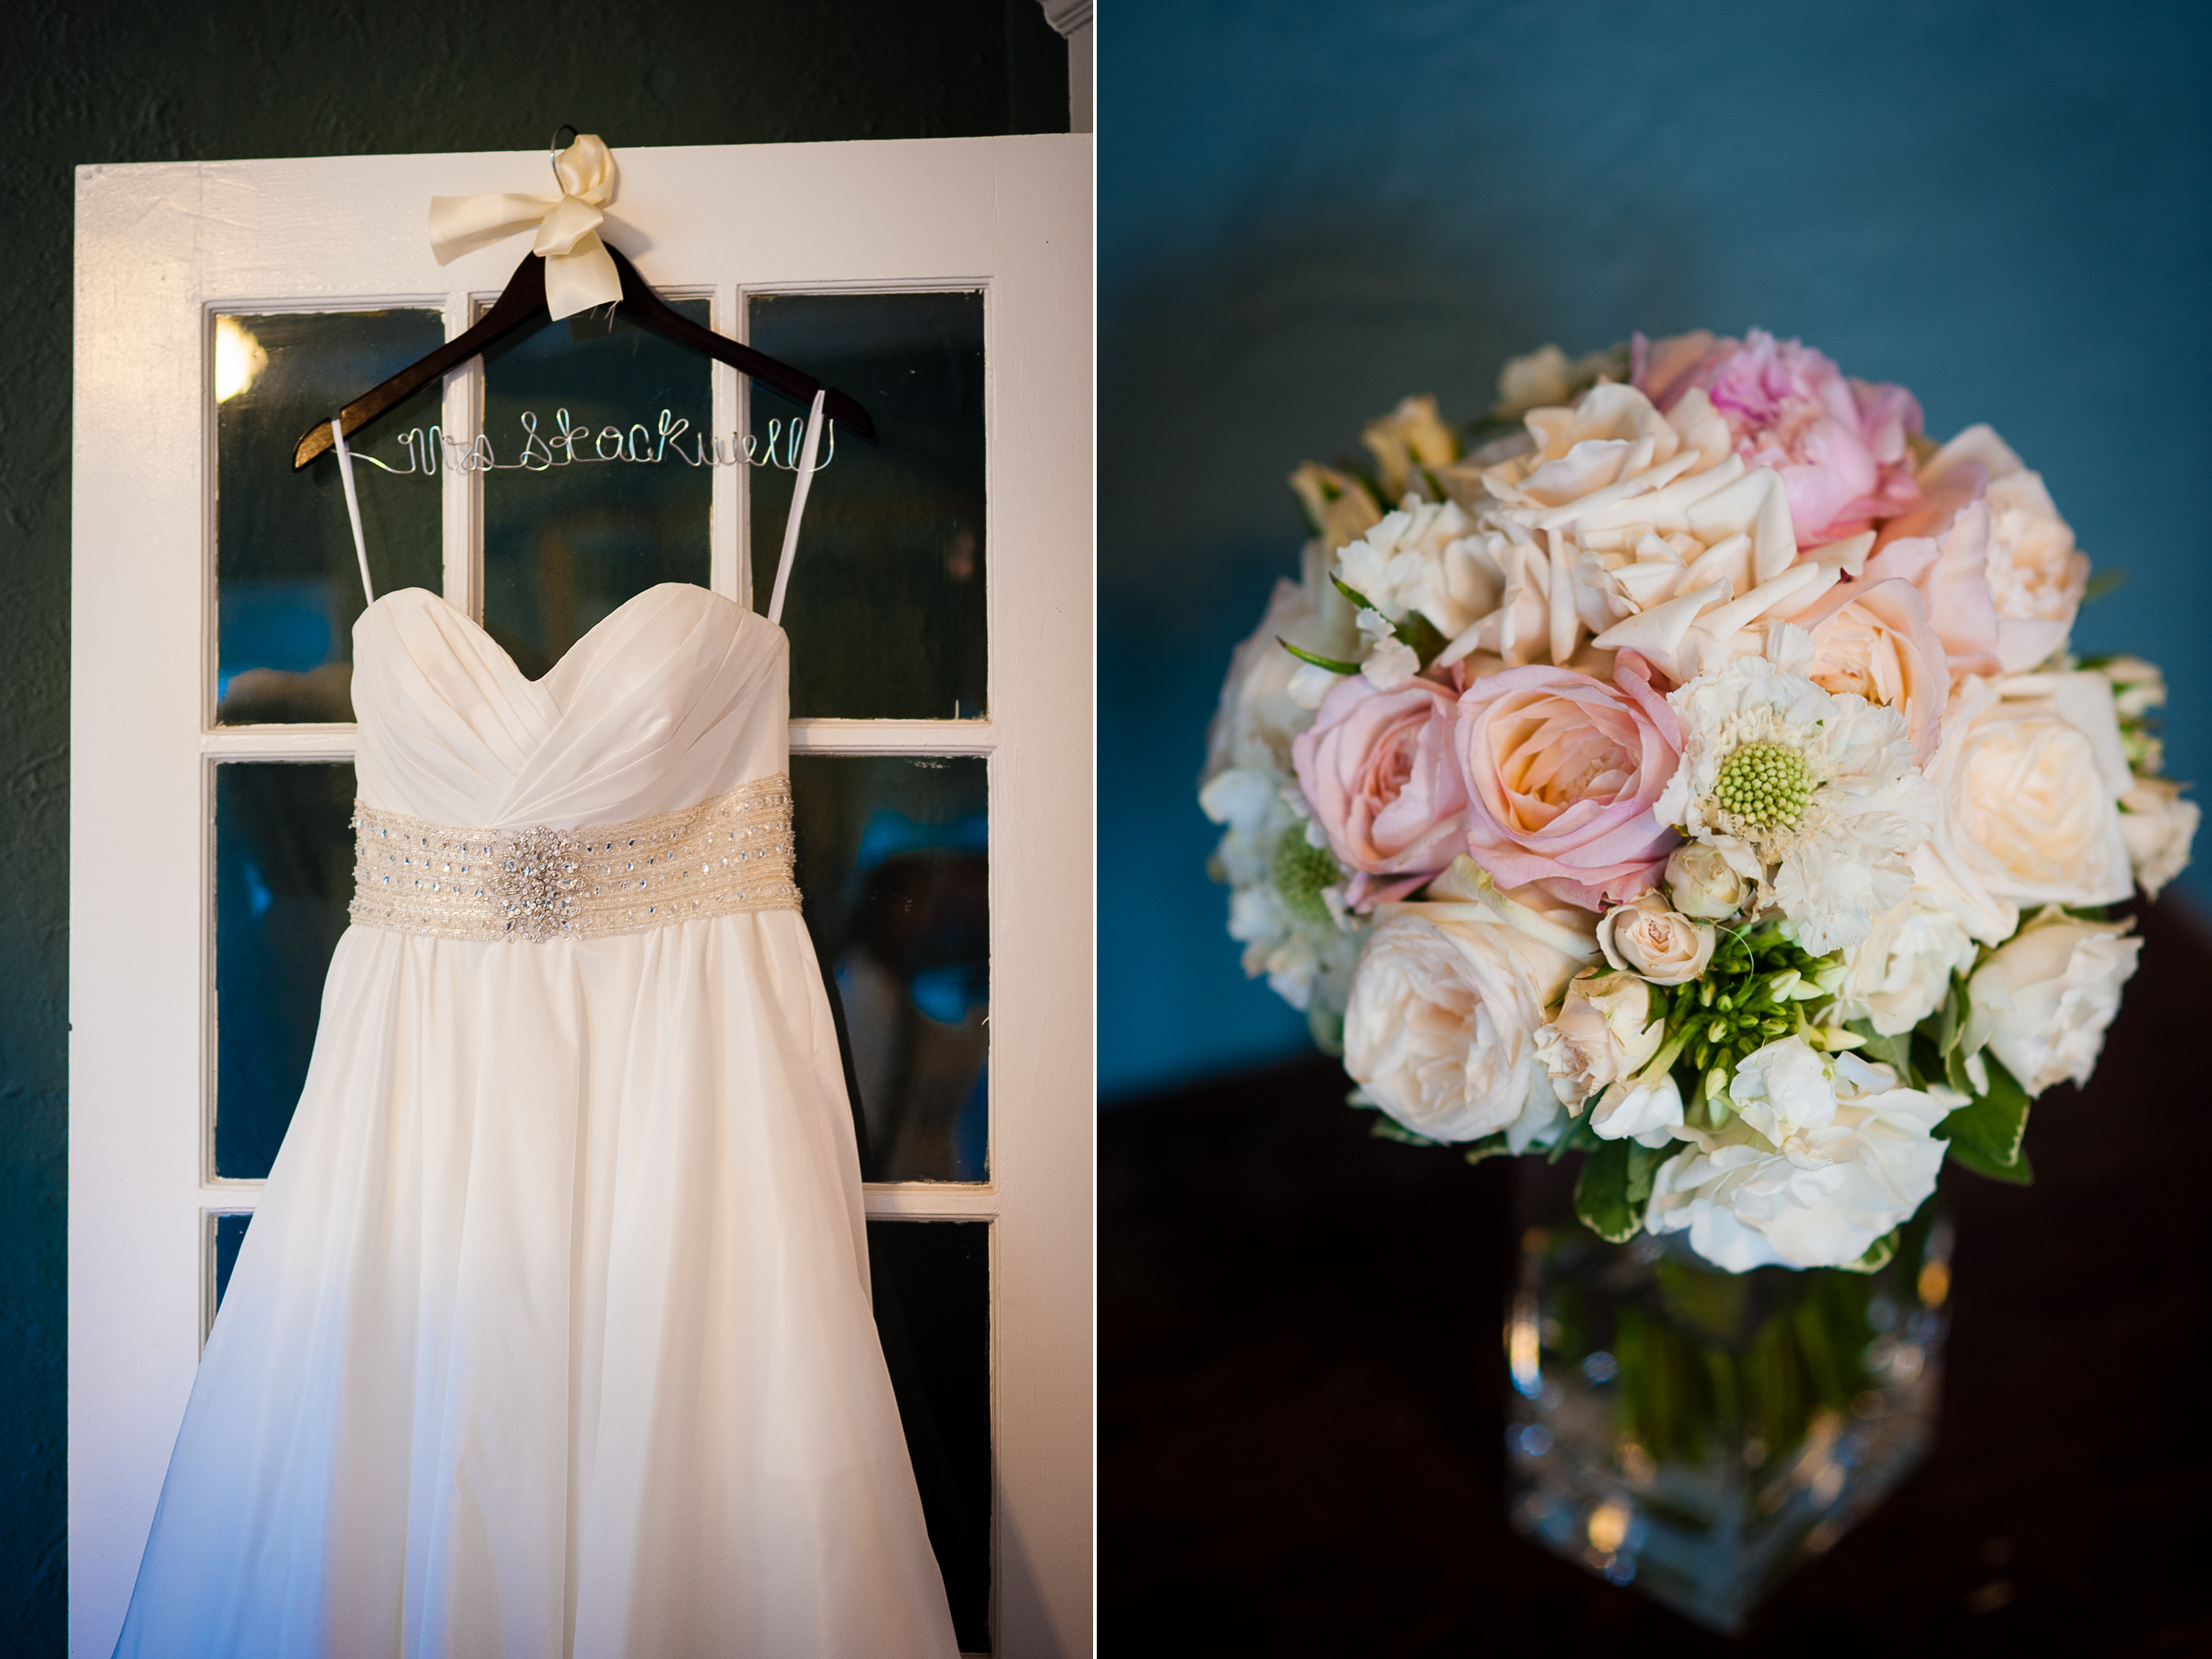 beautiful wedding gown hangs against white door while a stunning bouquet is shown on a wooden table